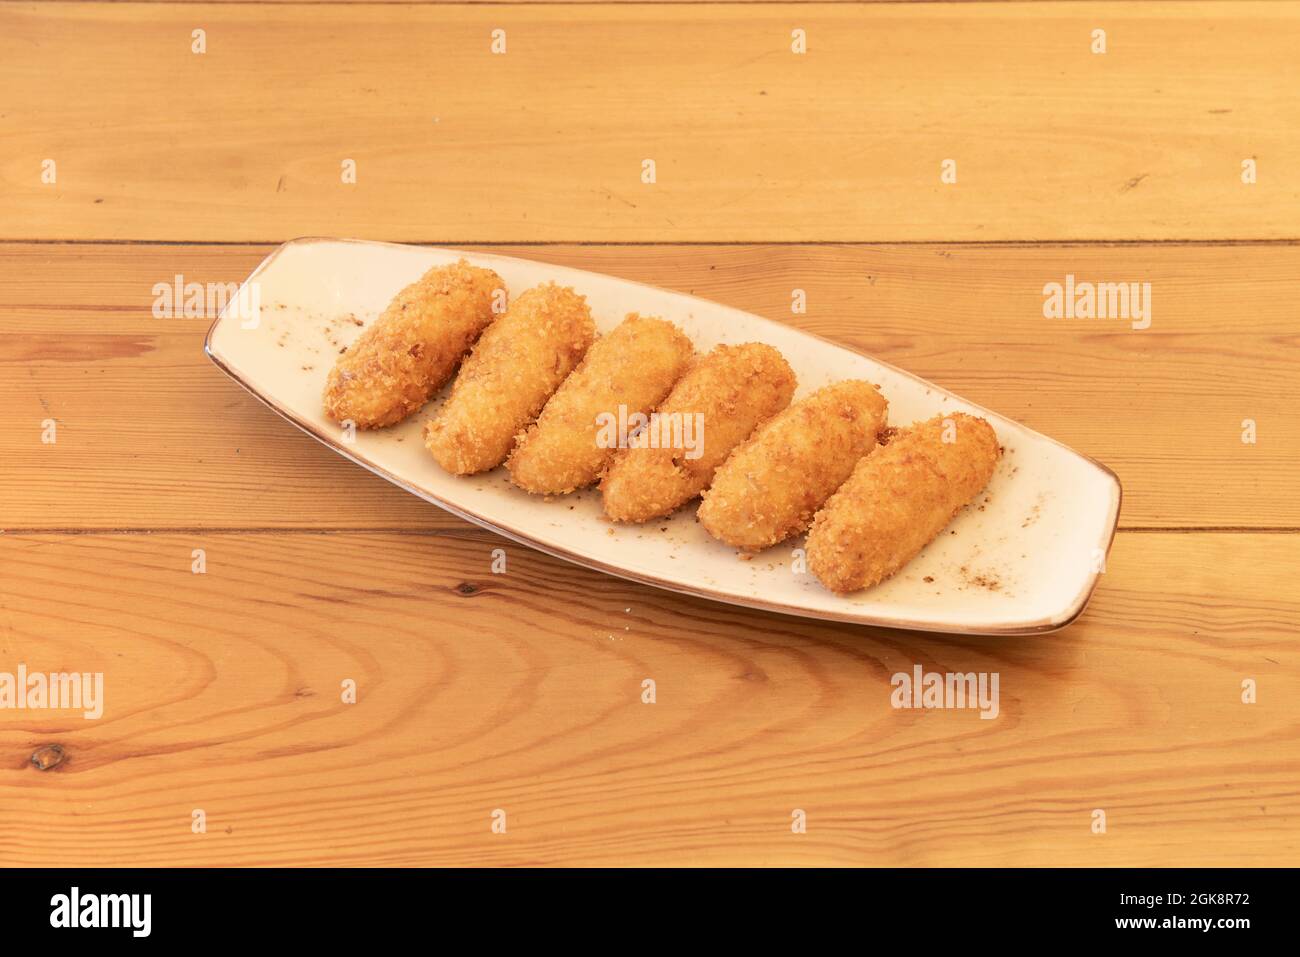 delicious Spanish tapa of homemade croquettes breaded and stuffed with cream with Iberian ham on wooden table Stock Photo